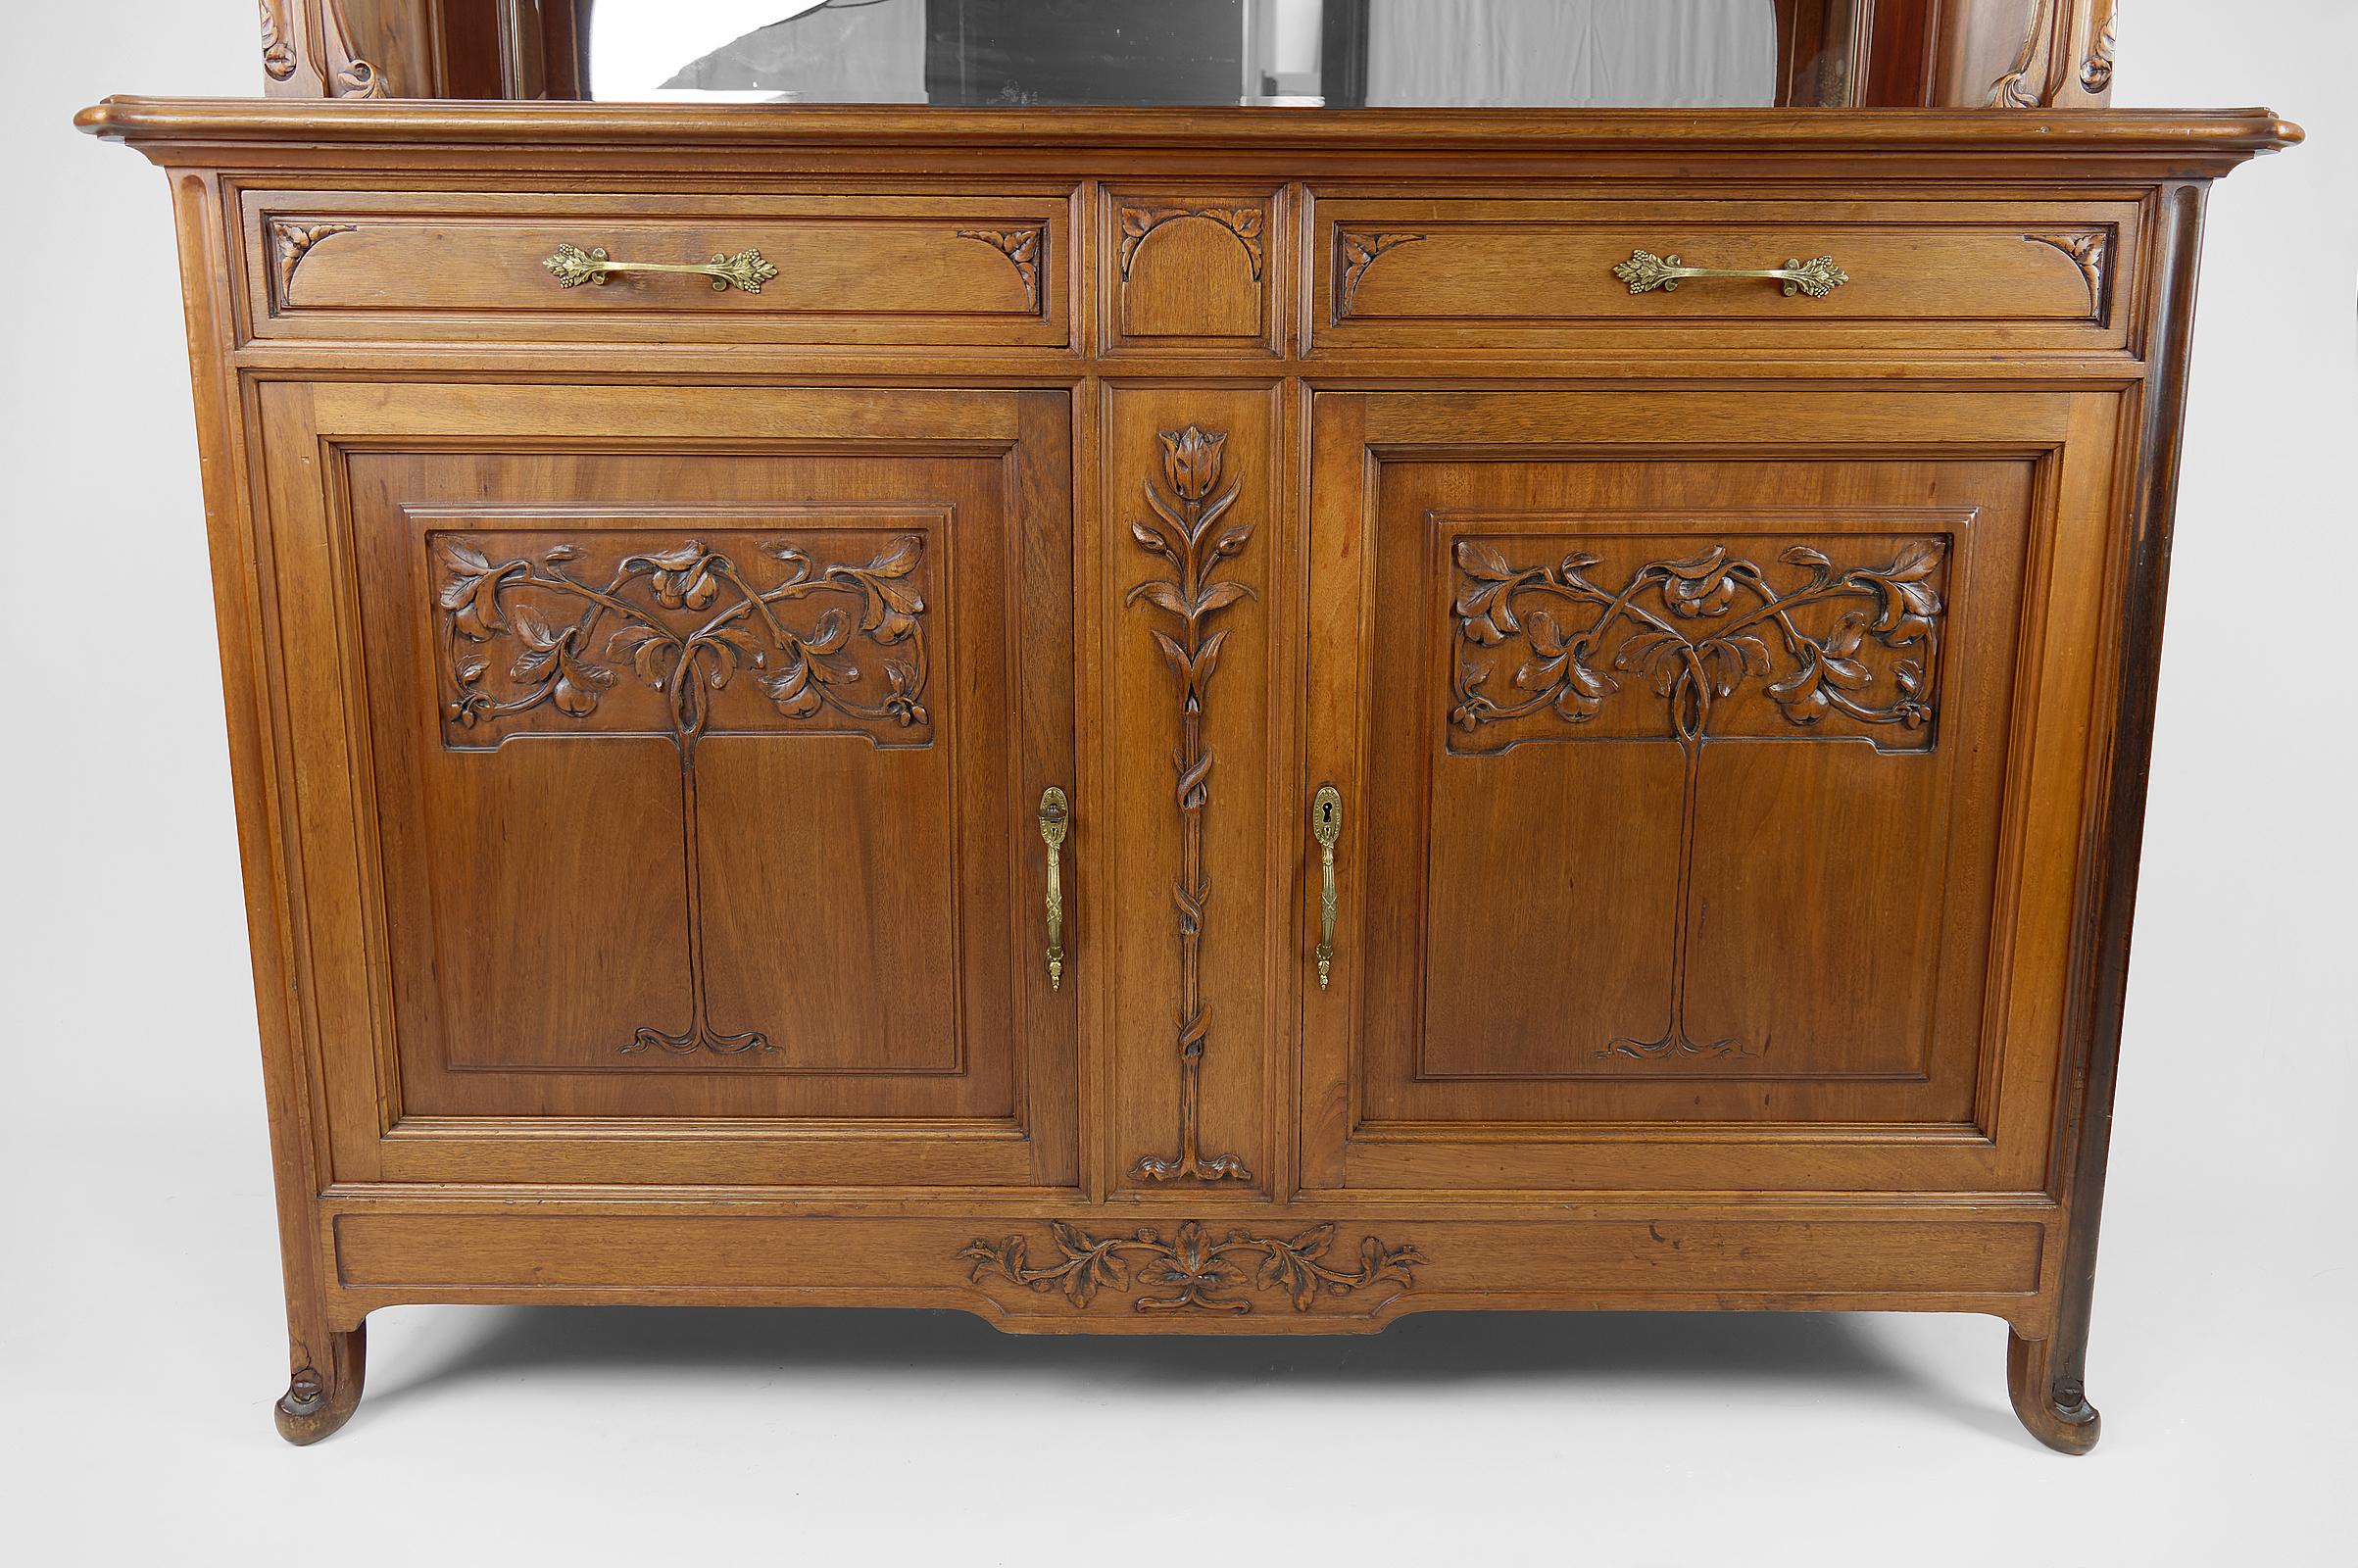 French Art Nouveau Sideboard in Carved Walnut with Stained Glass, circa 1910 For Sale 5